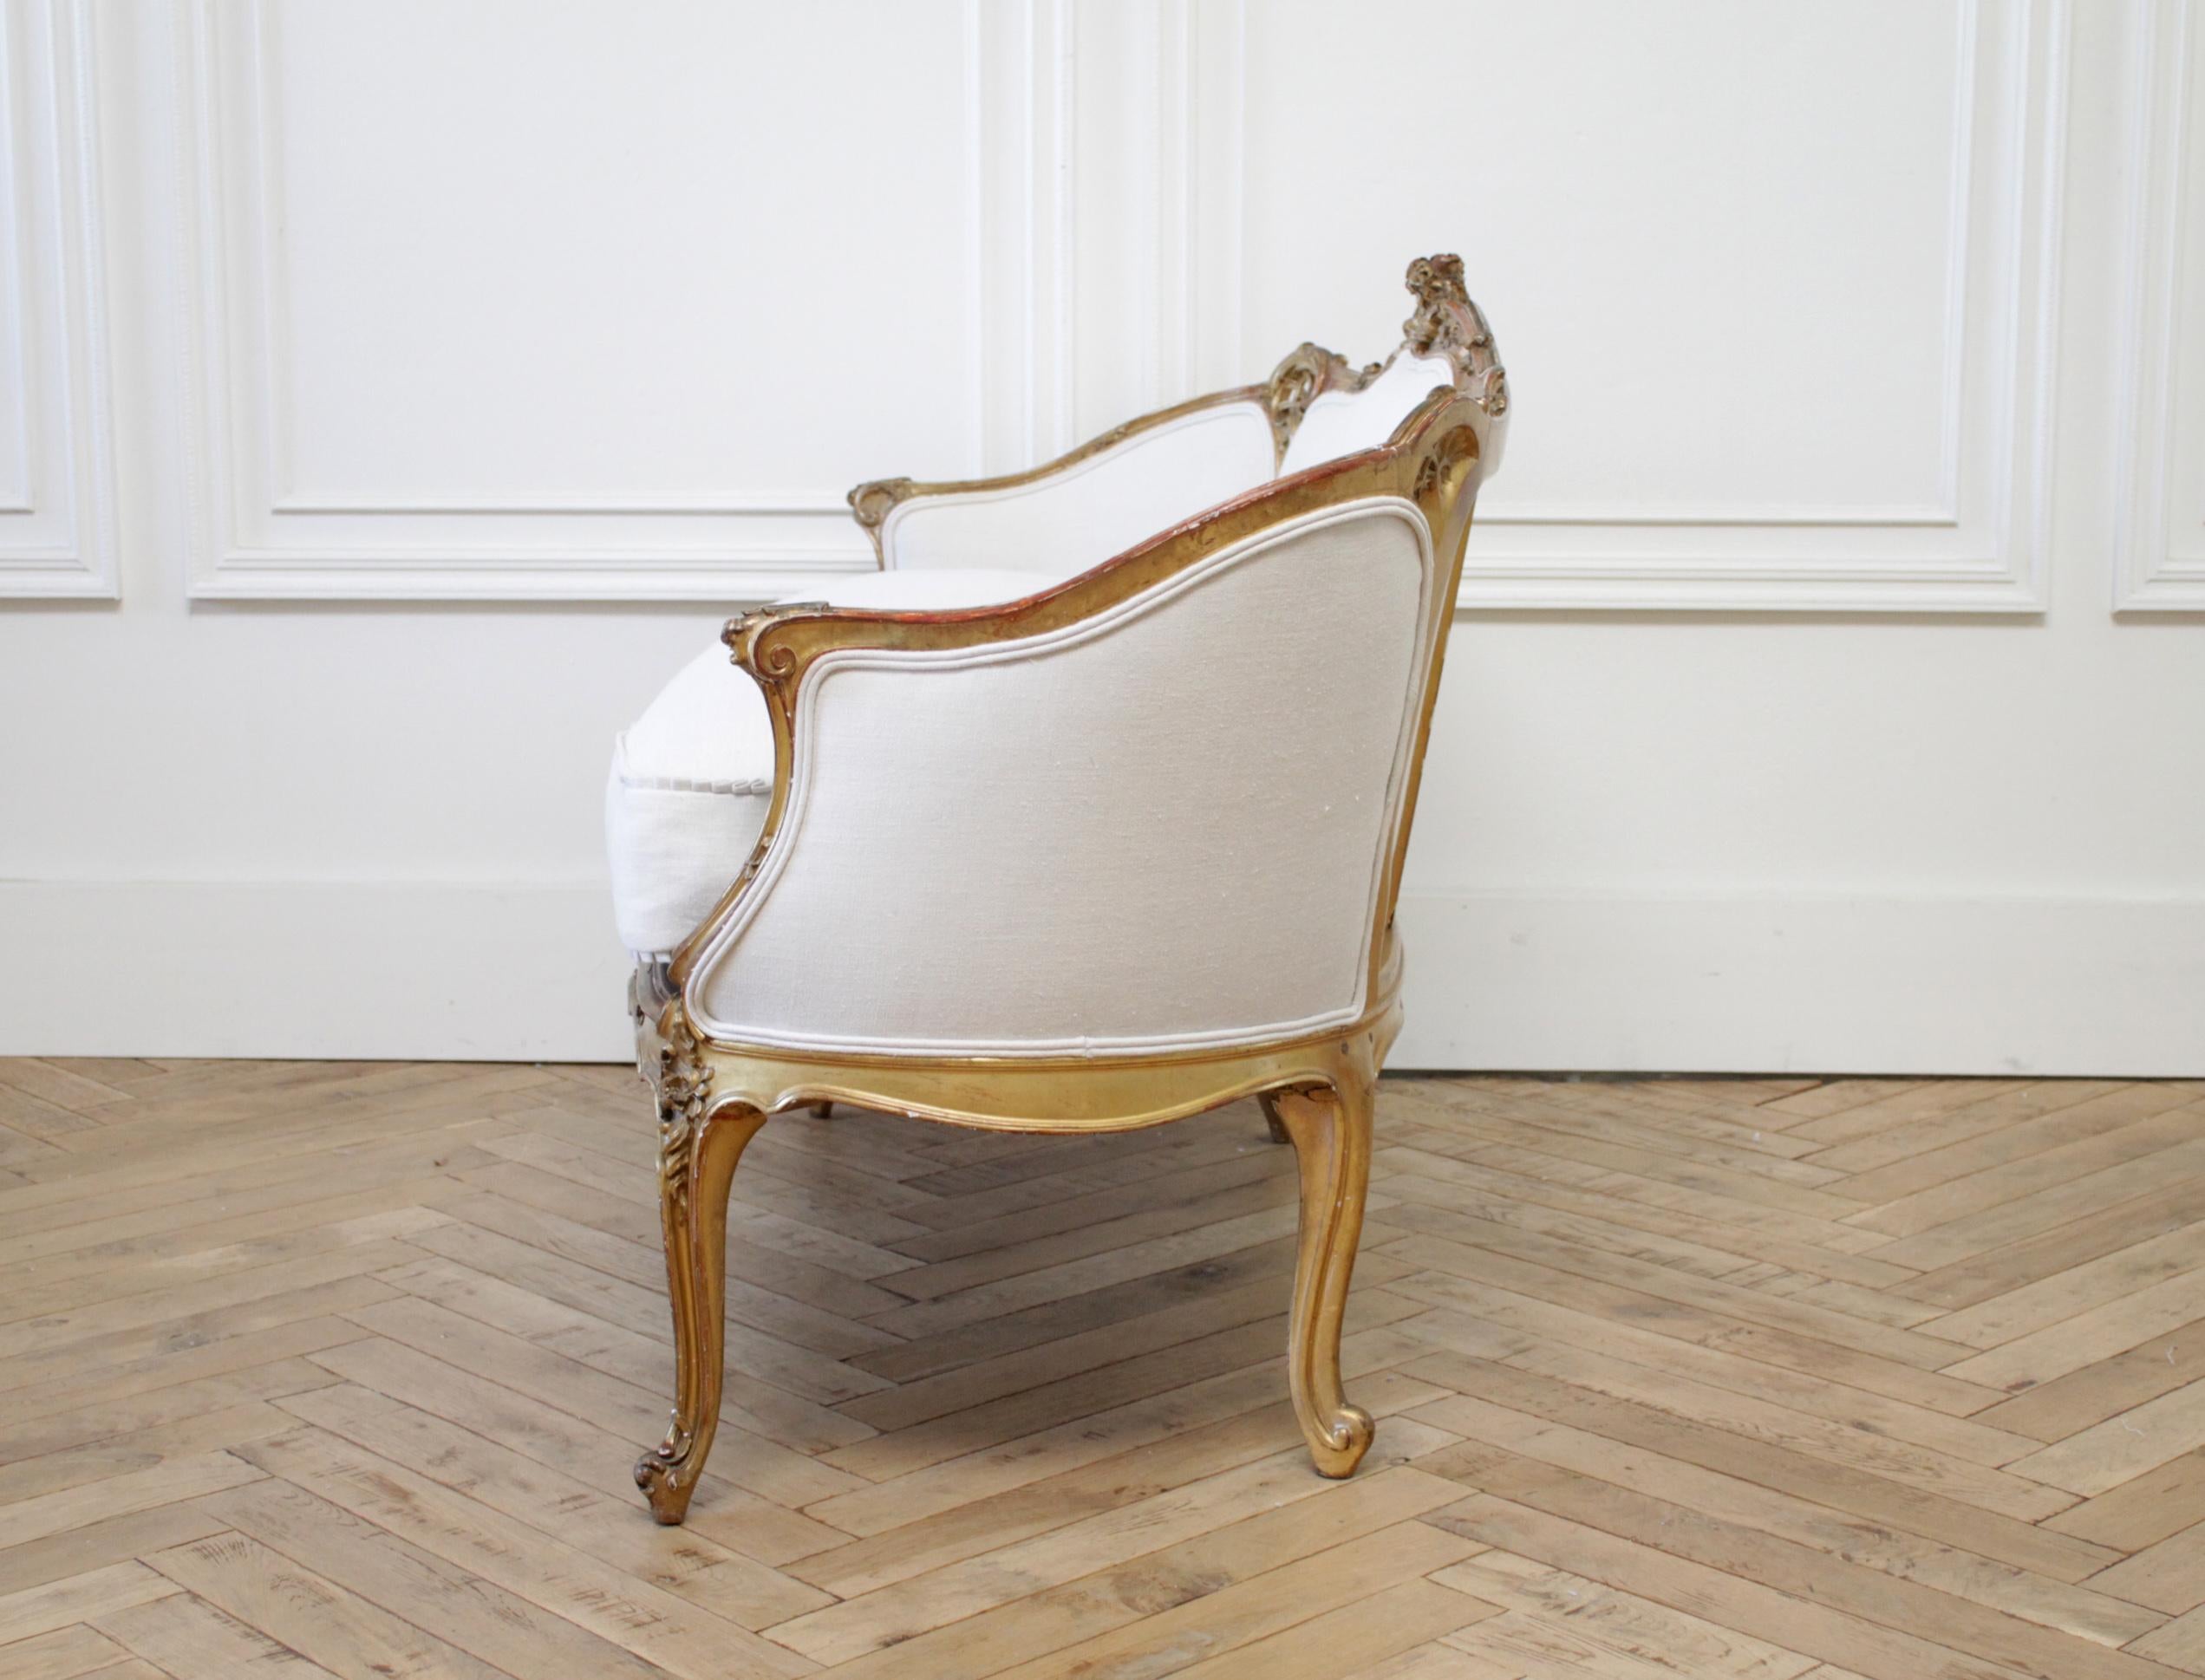 Antique French Louis XV style giltwood settee with linen slip cover down cushion
Original giltwood linen settee with an aged patina finish. We've reupholstered this in a light pre softened Irish Linen. The seat is a slip cover with zipper to remove